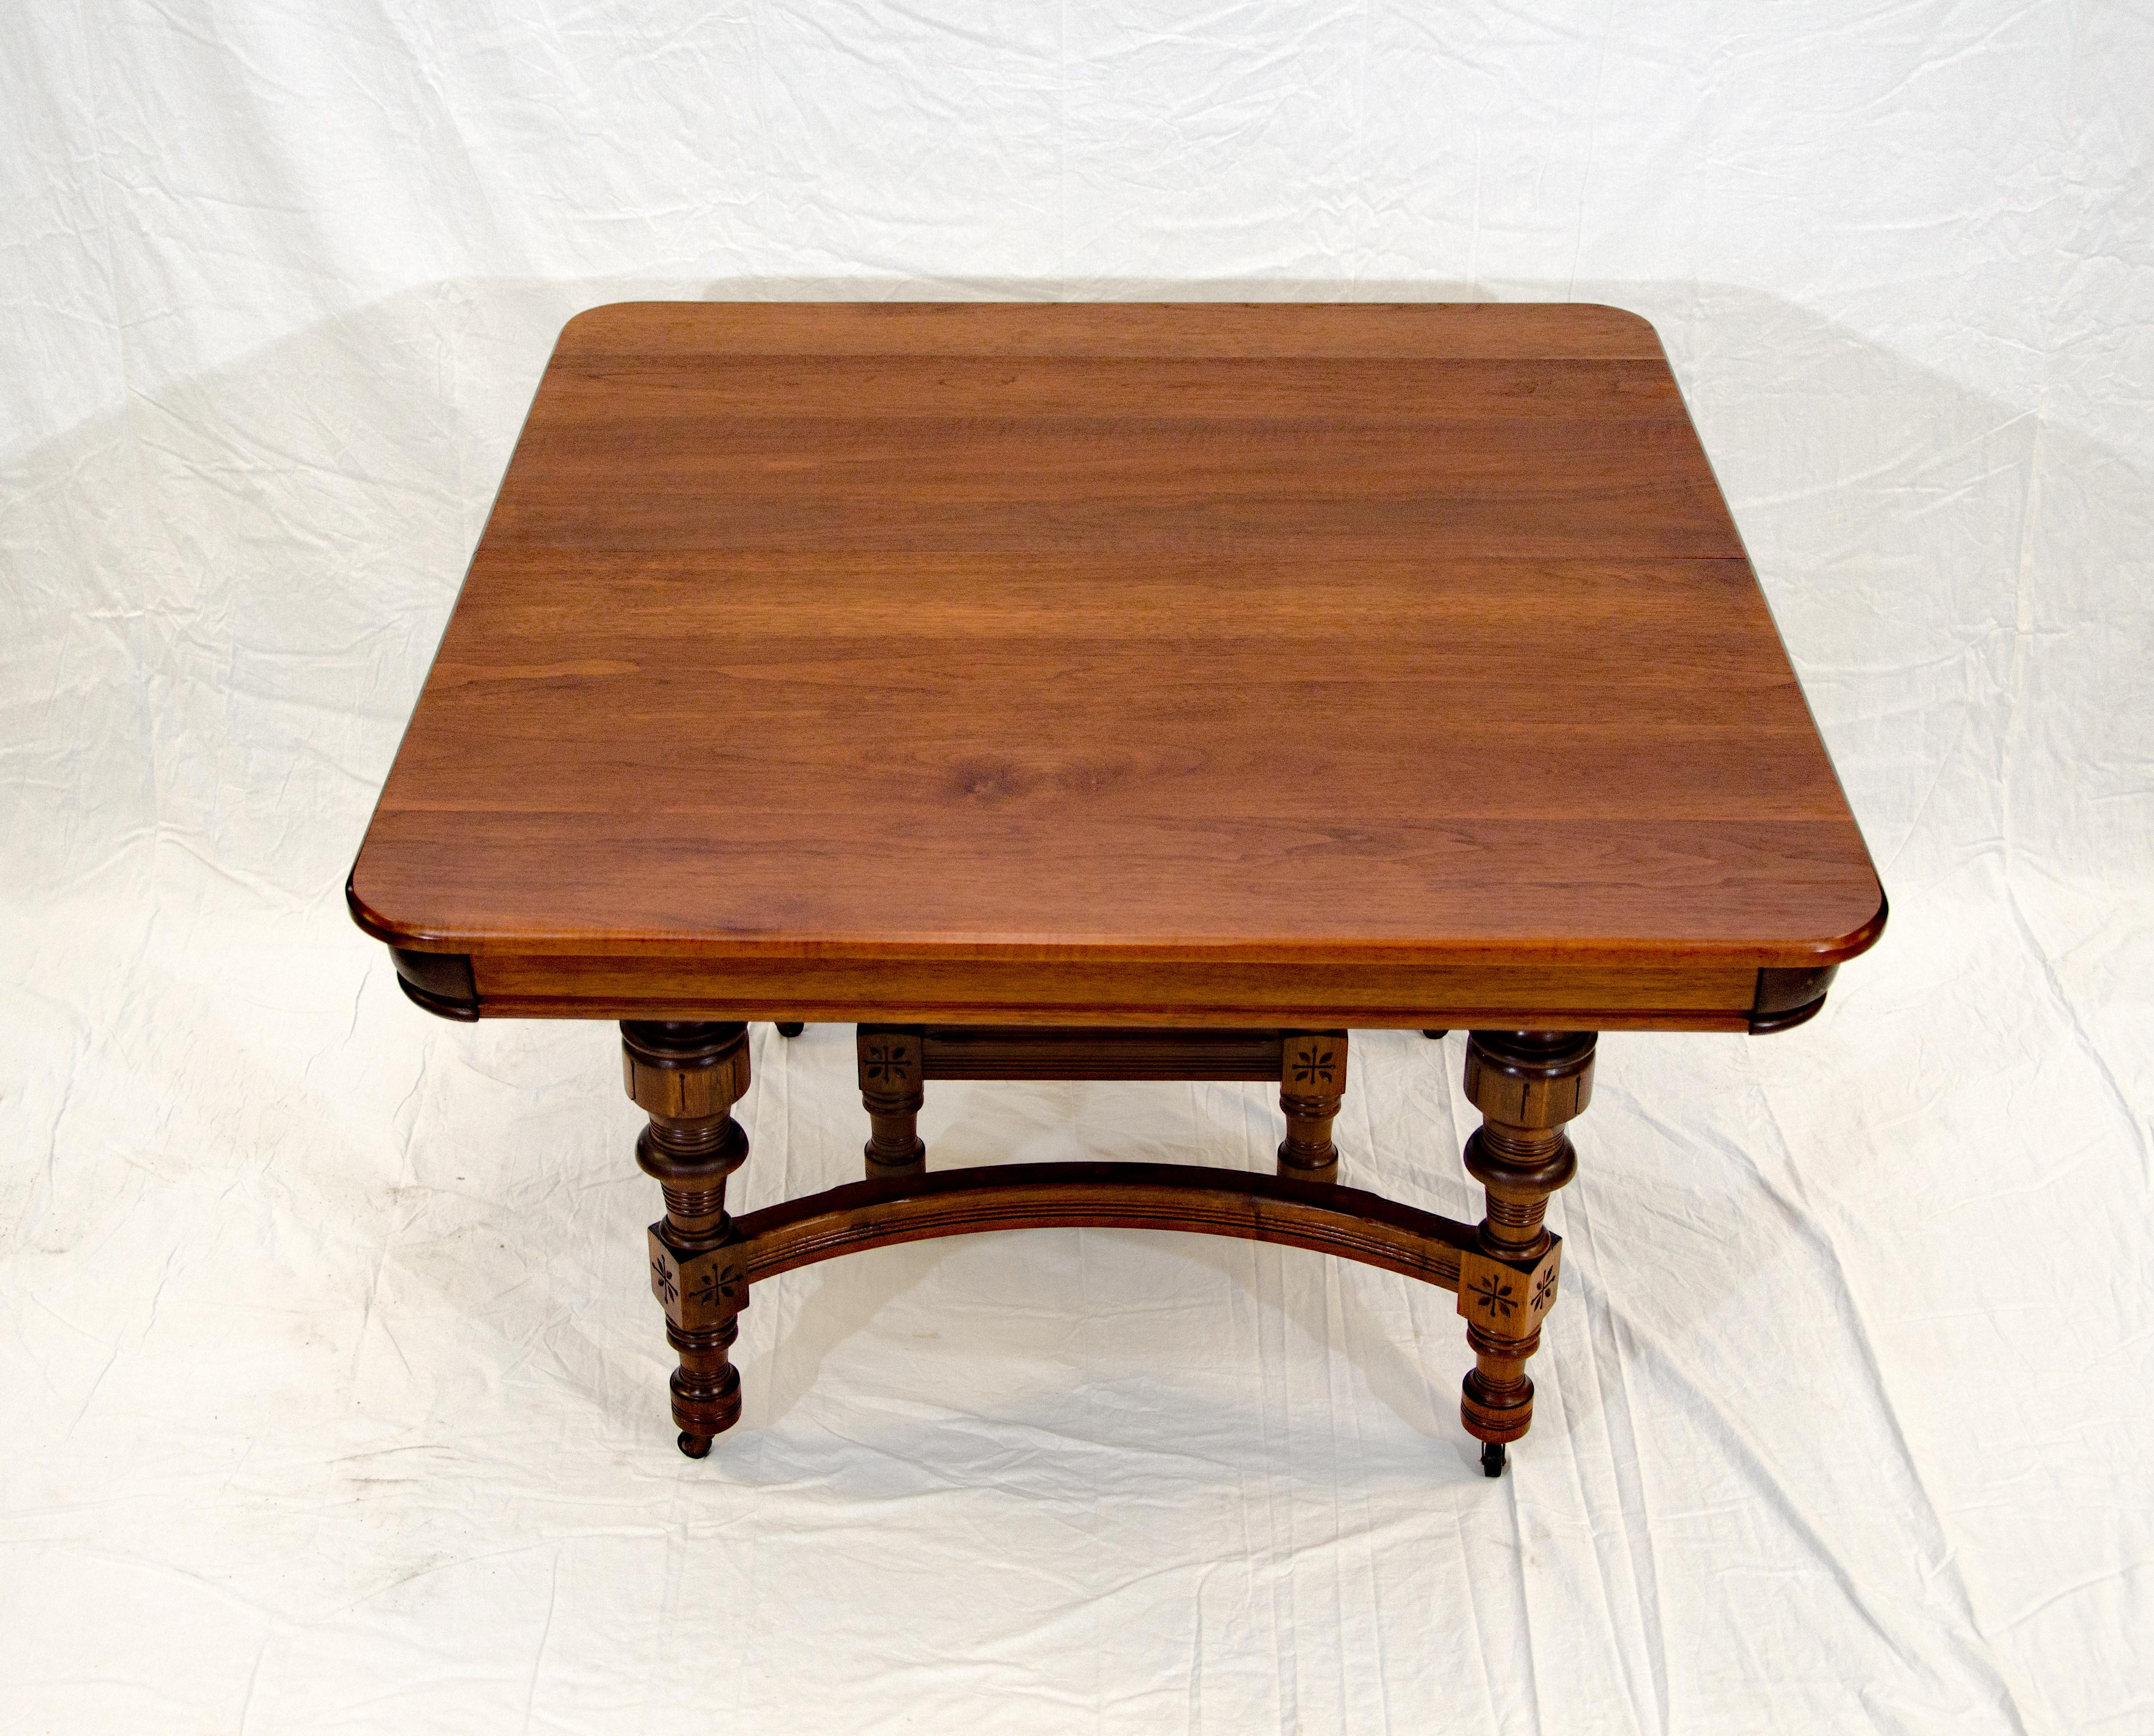 Eastlake Victorian Walnut Dining Table with Two Leaves